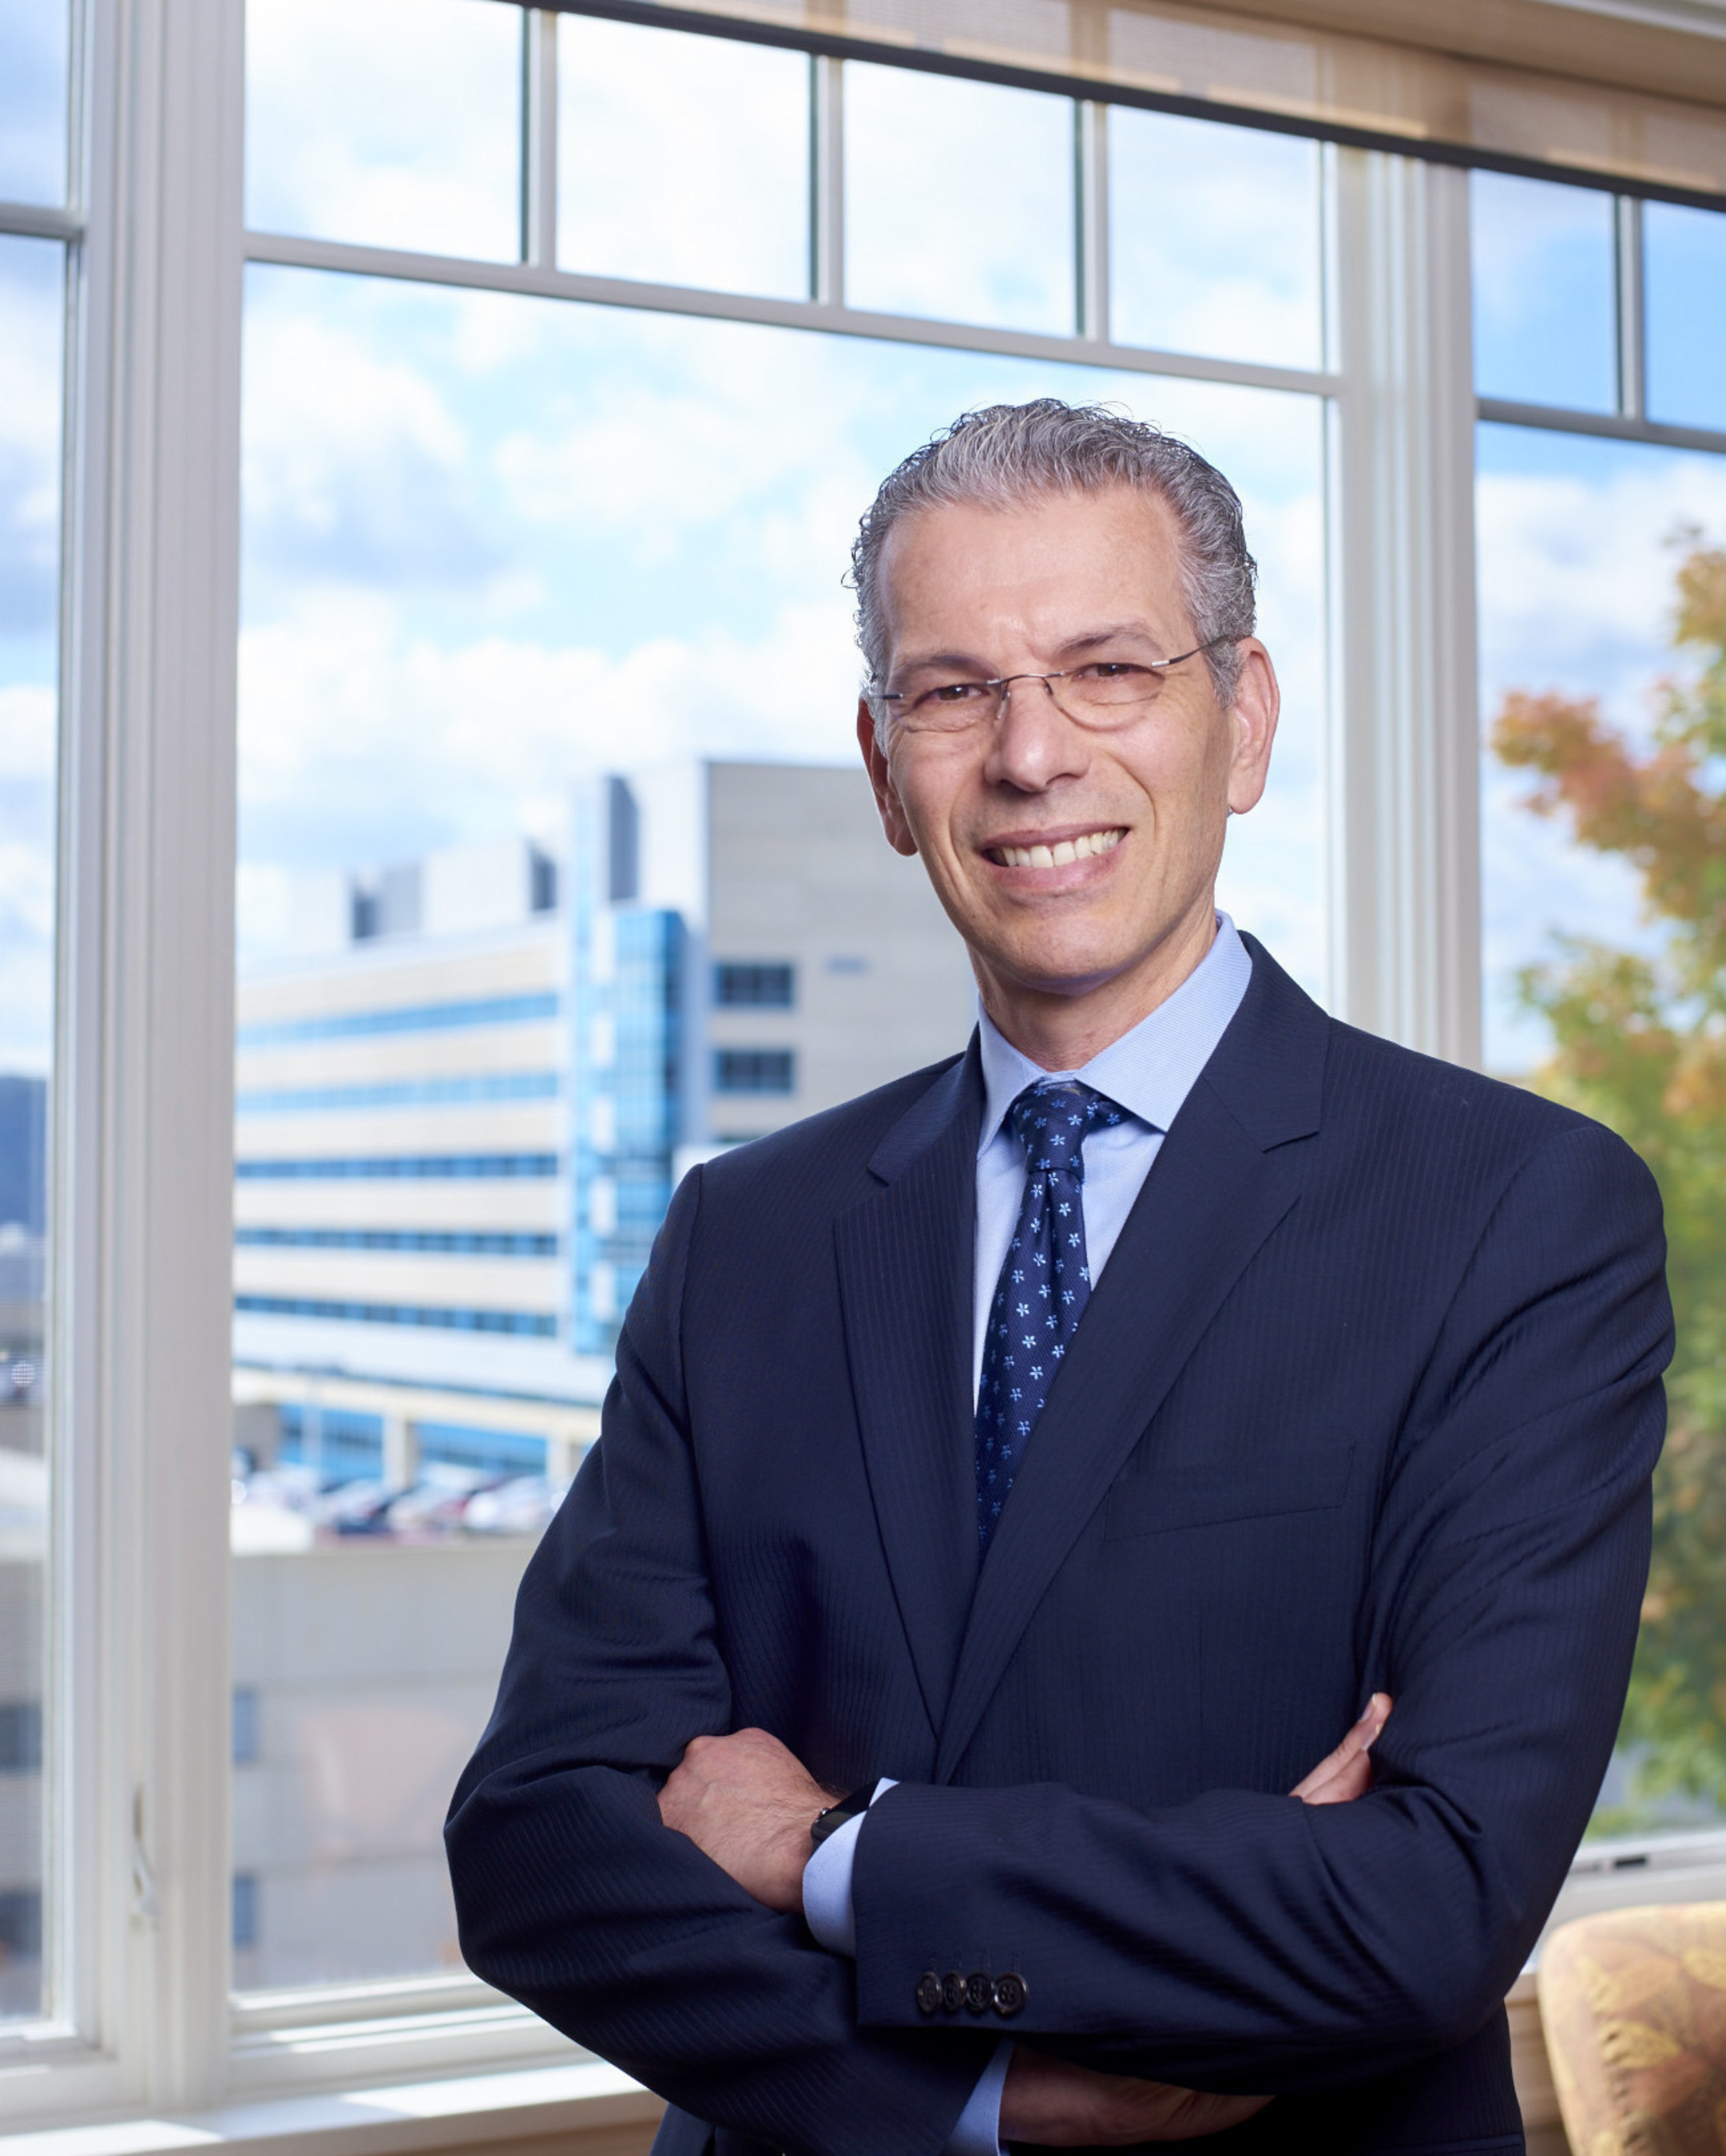 David T. Feinberg, M.D., MBA, President and CEO of Geisinger Health System